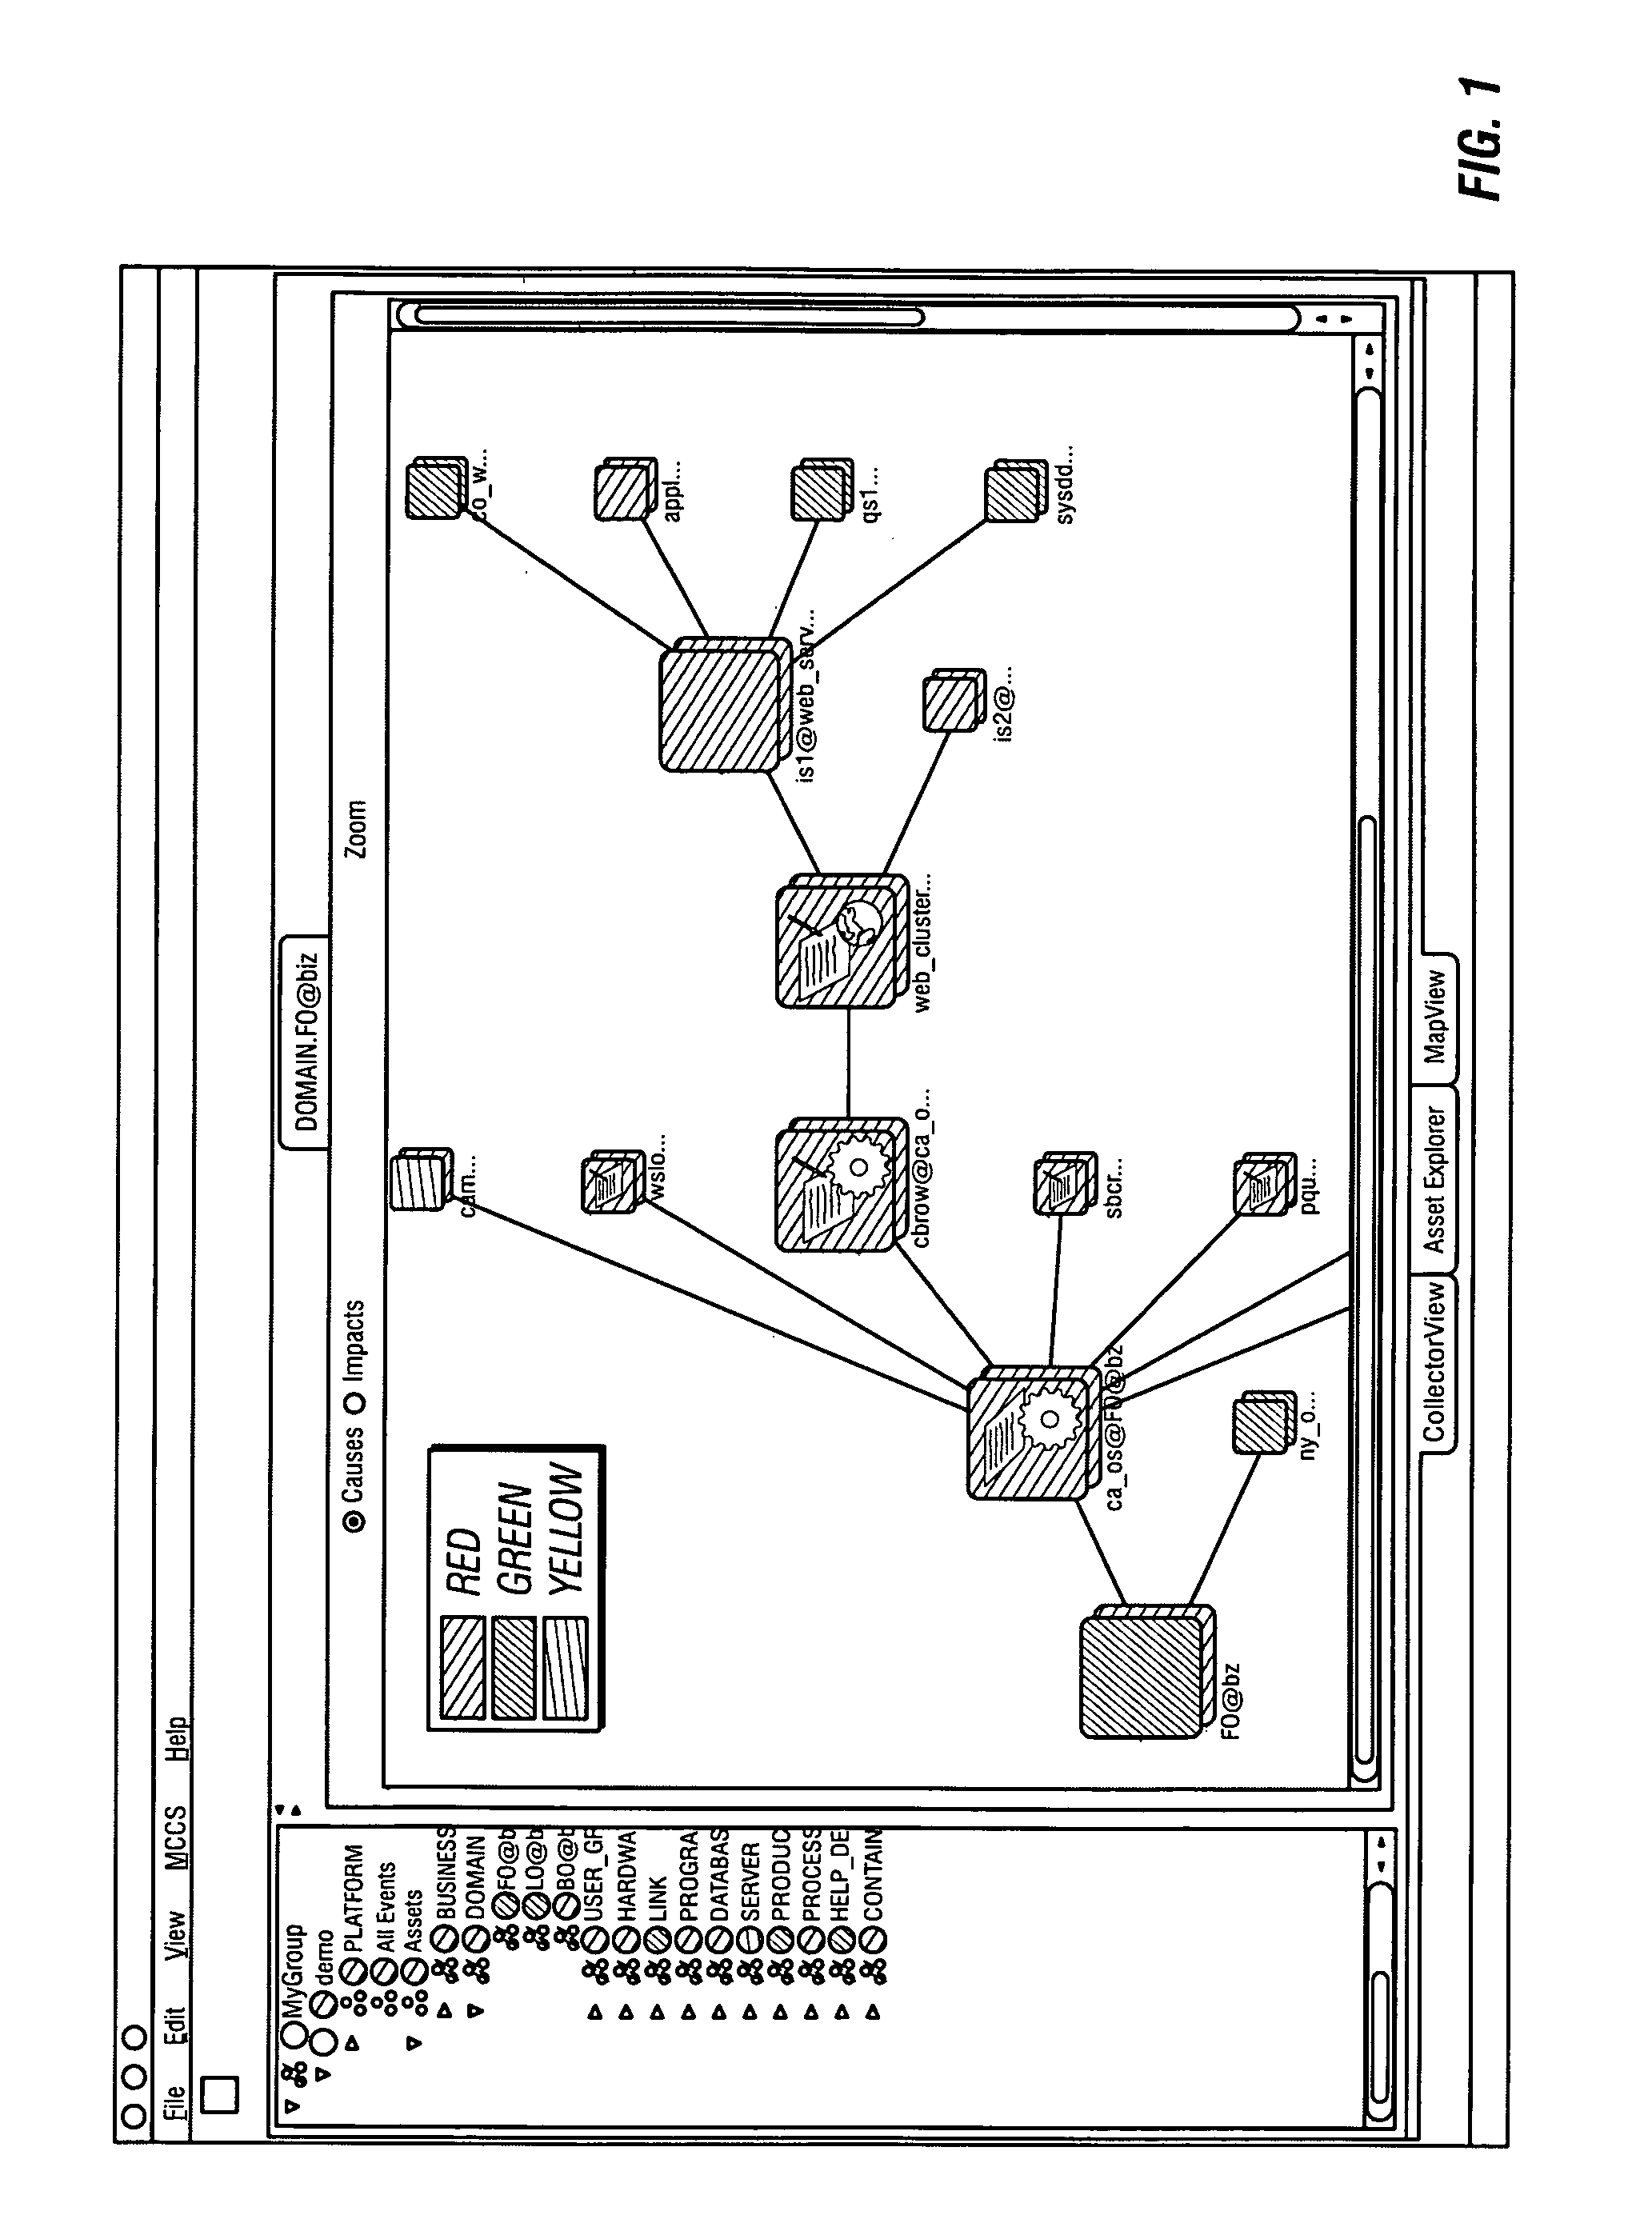 System and method for assessing and indicating the health of components